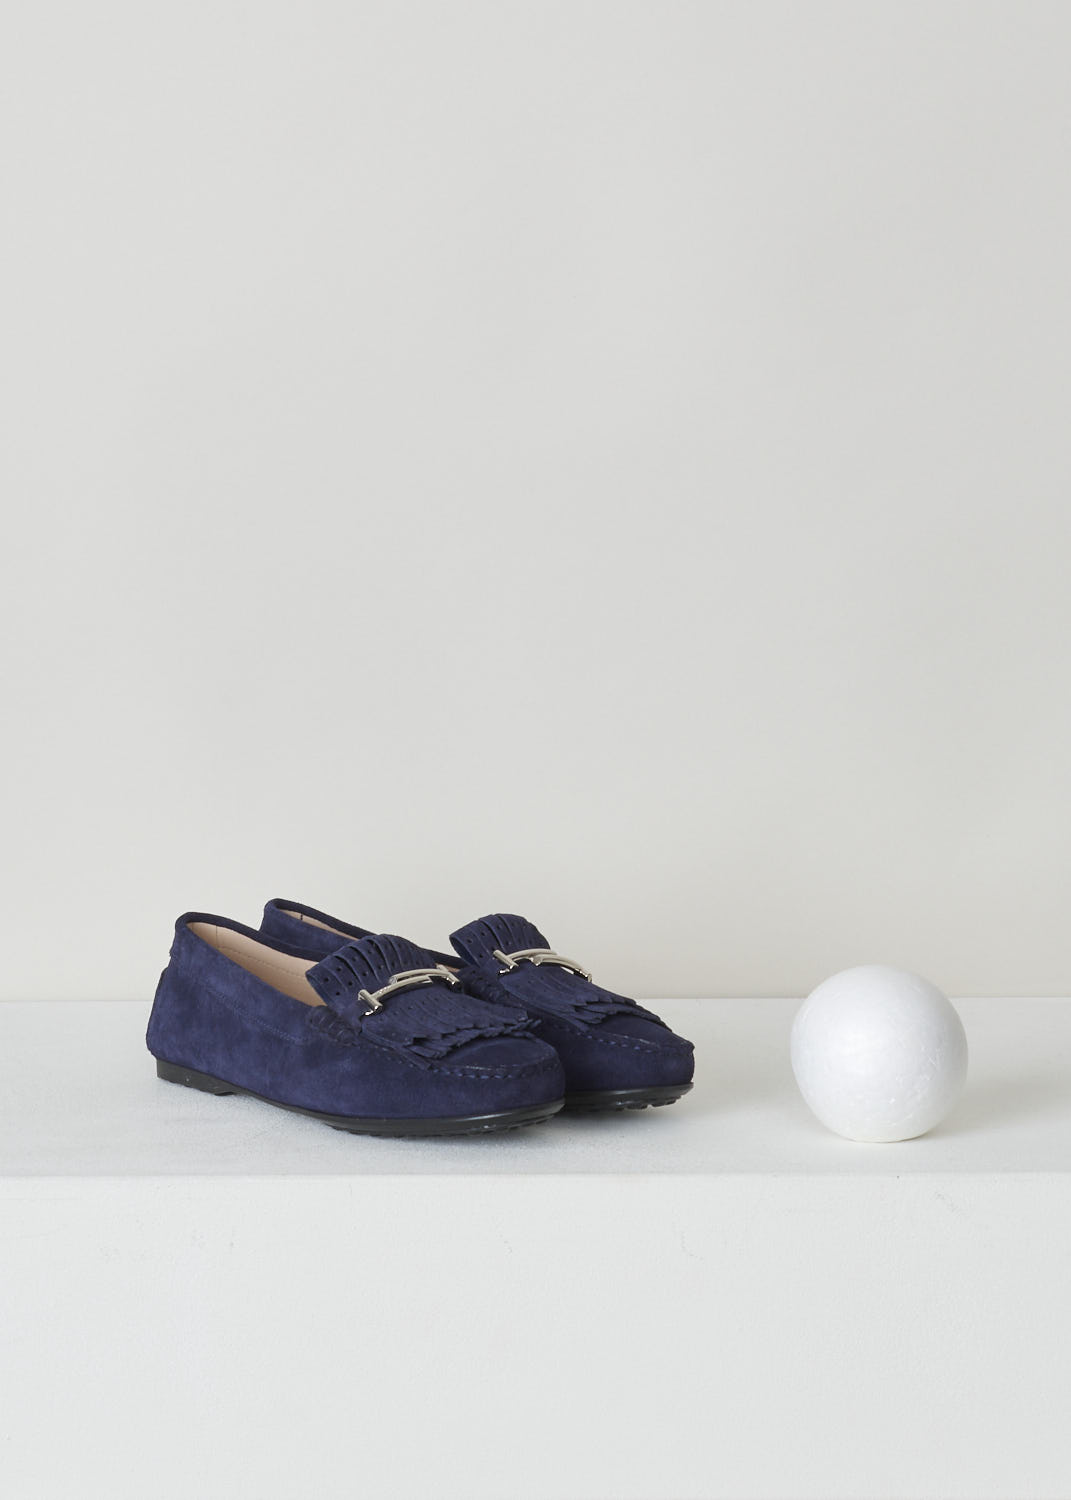 TODS, BLUE SUEDE MOCASSINS WITH BUCKLE, XXW0LU0Y470RE0U824, Blue, Front, Blue suede loafers with a rounded toe. These shoes feature fringed tassels and a silver-toned buckle. Noticeable are the rubber soles with studded profile that extends further to the rear trim.
